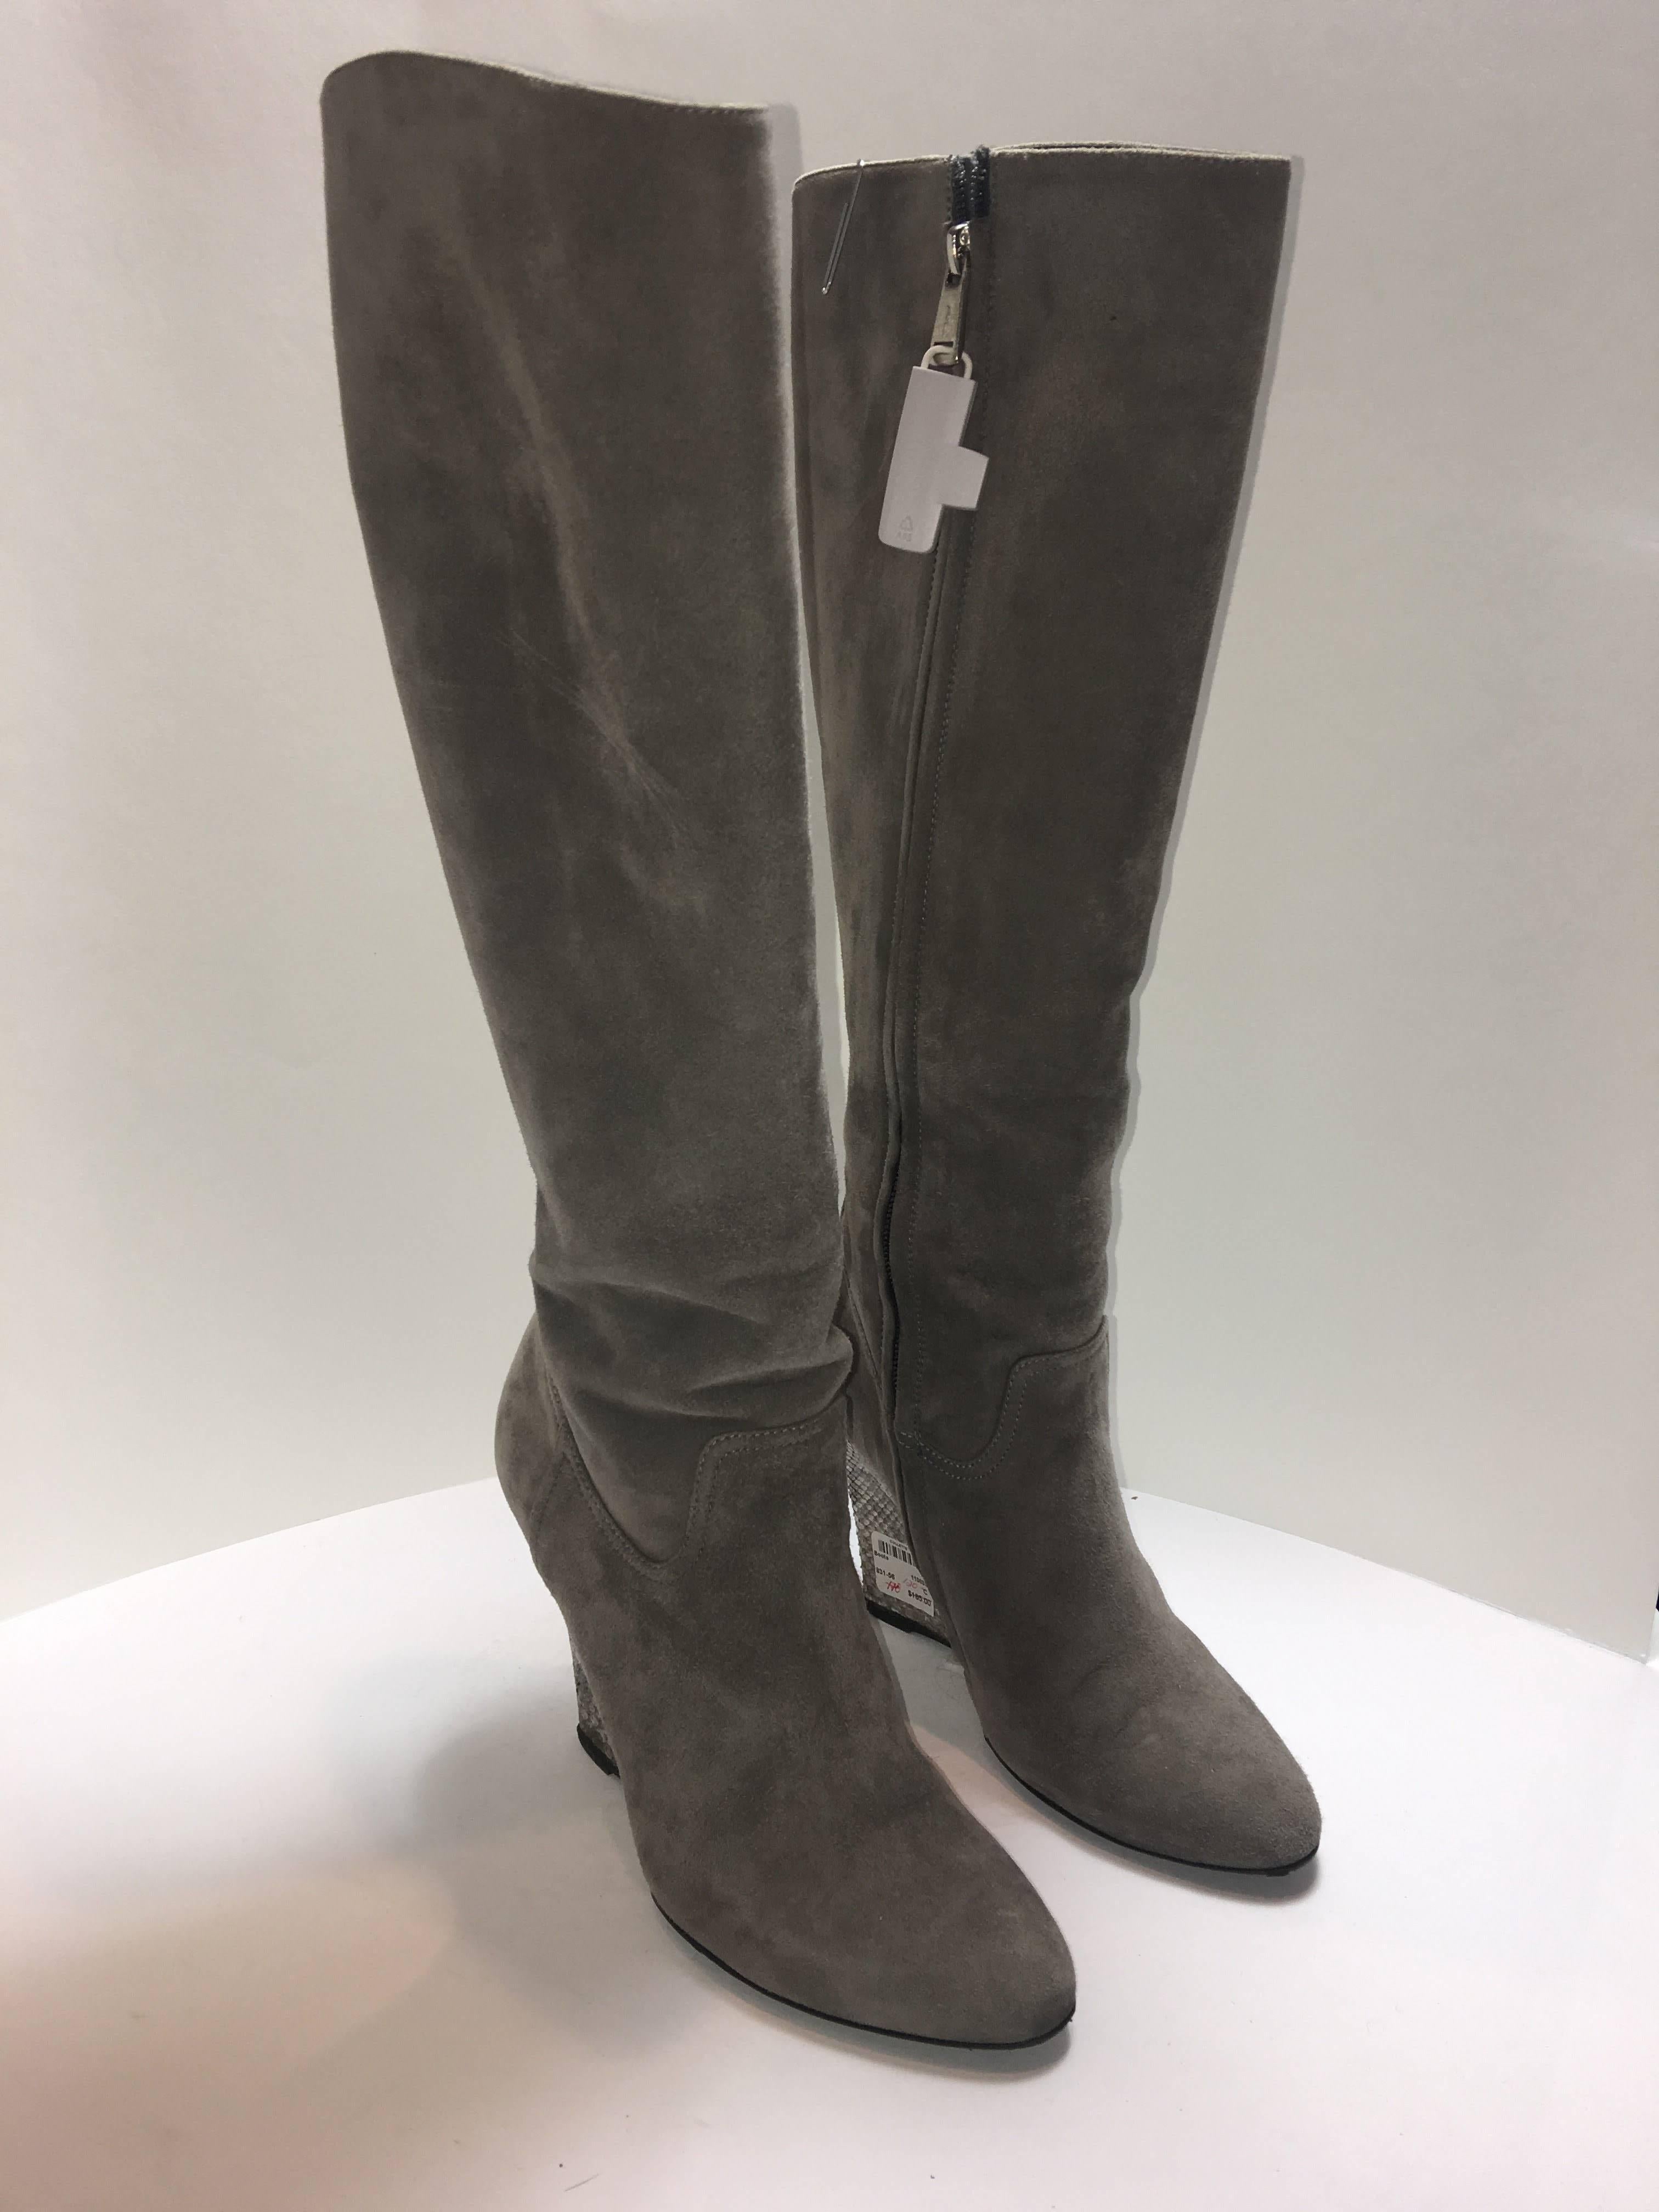 Ralph Lauren Boots in size 8.5. Grey Suede Wedge Boot with Silver Python Heel. 